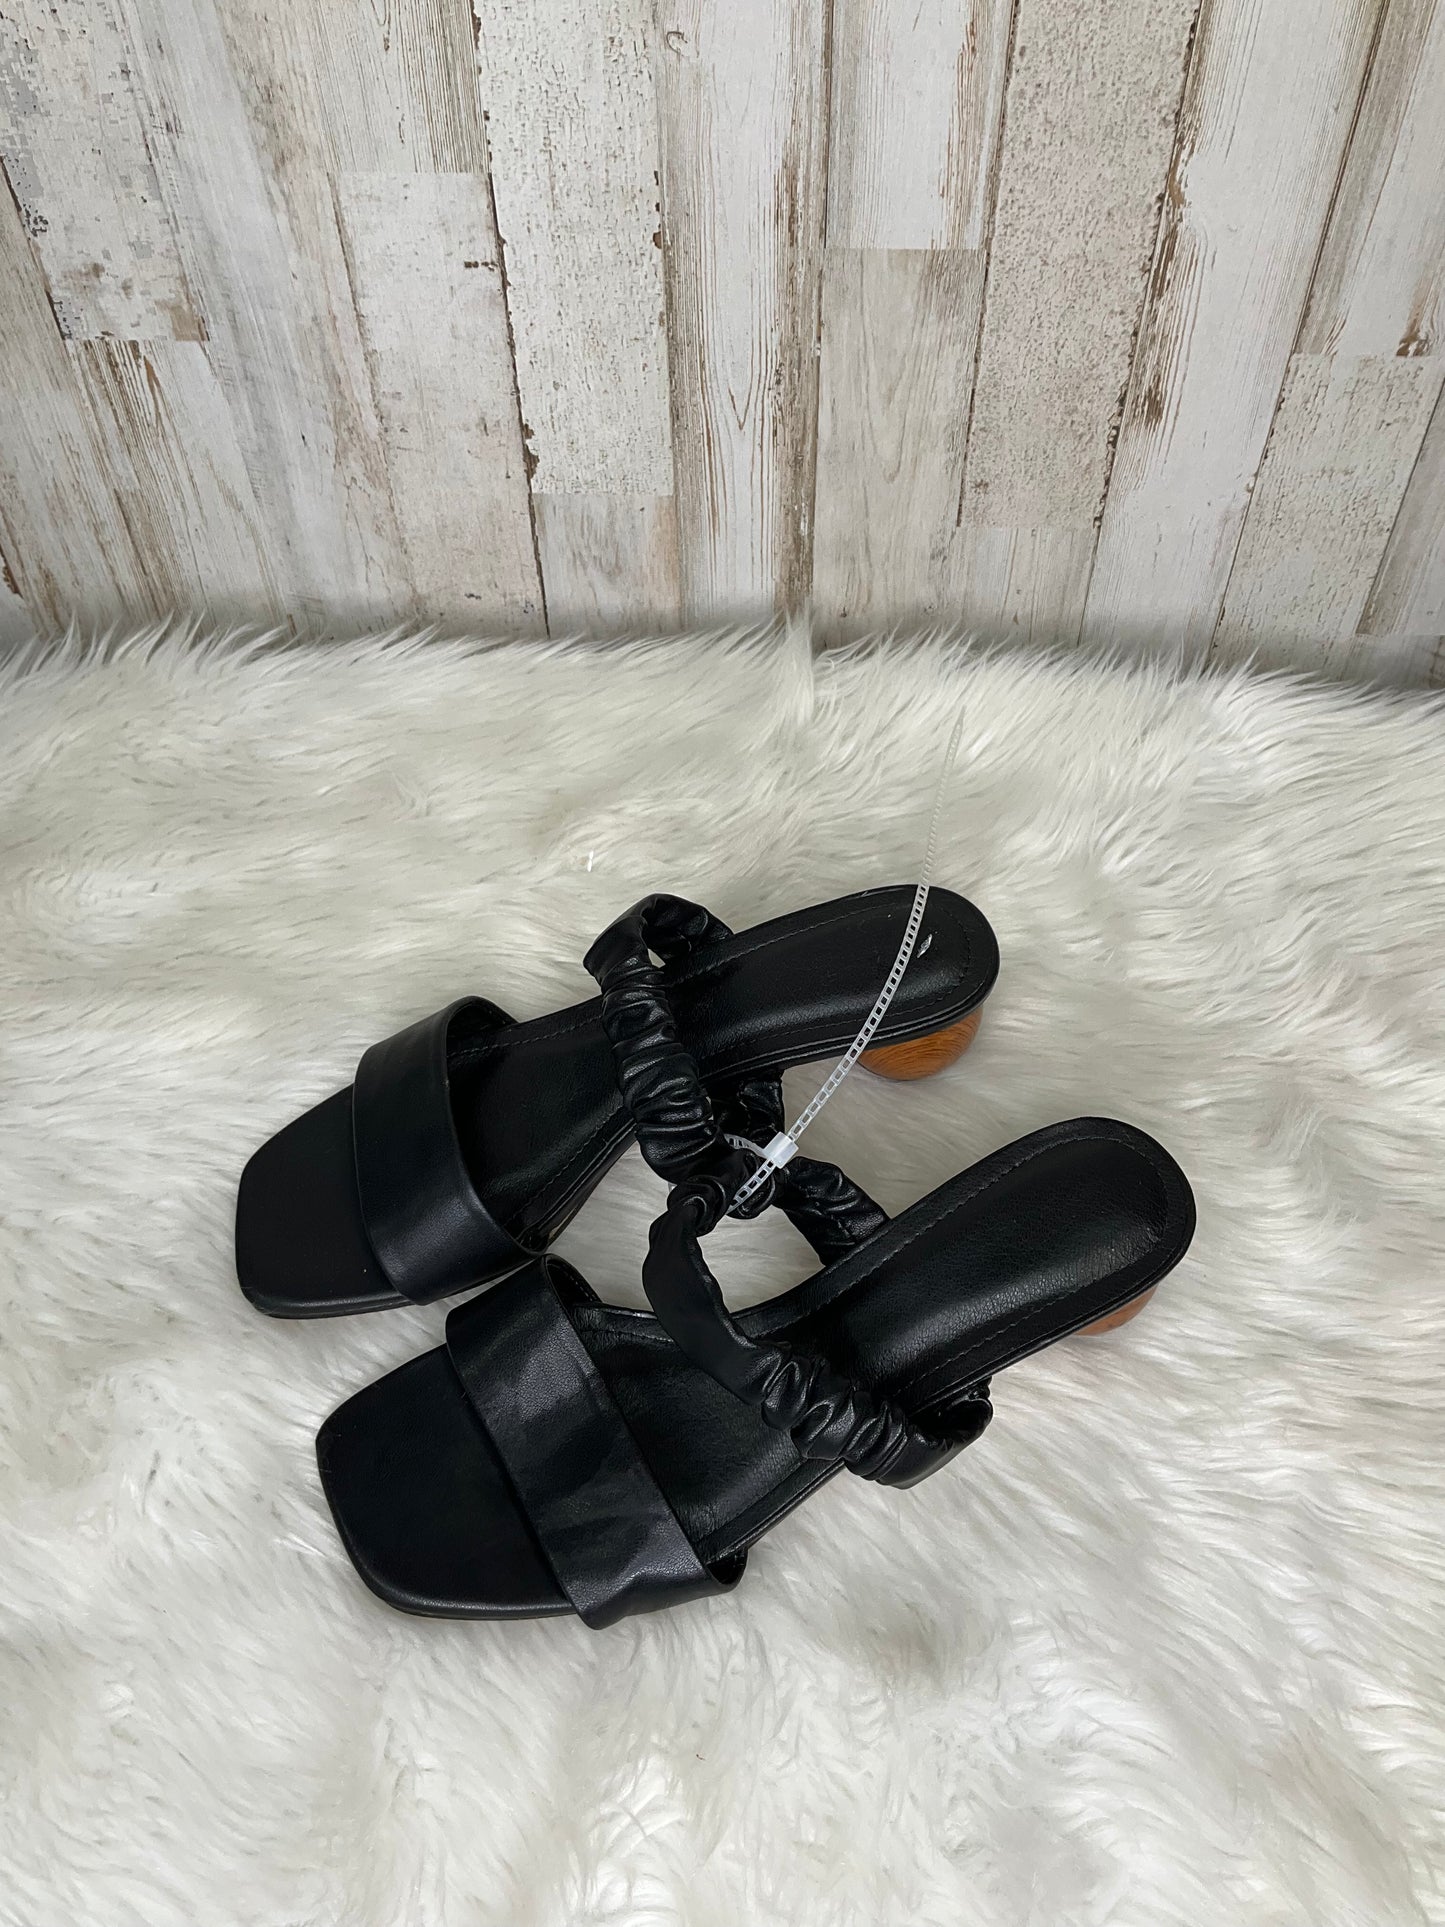 Sandals Heels Kitten By Clothes Mentor  Size: 8.5